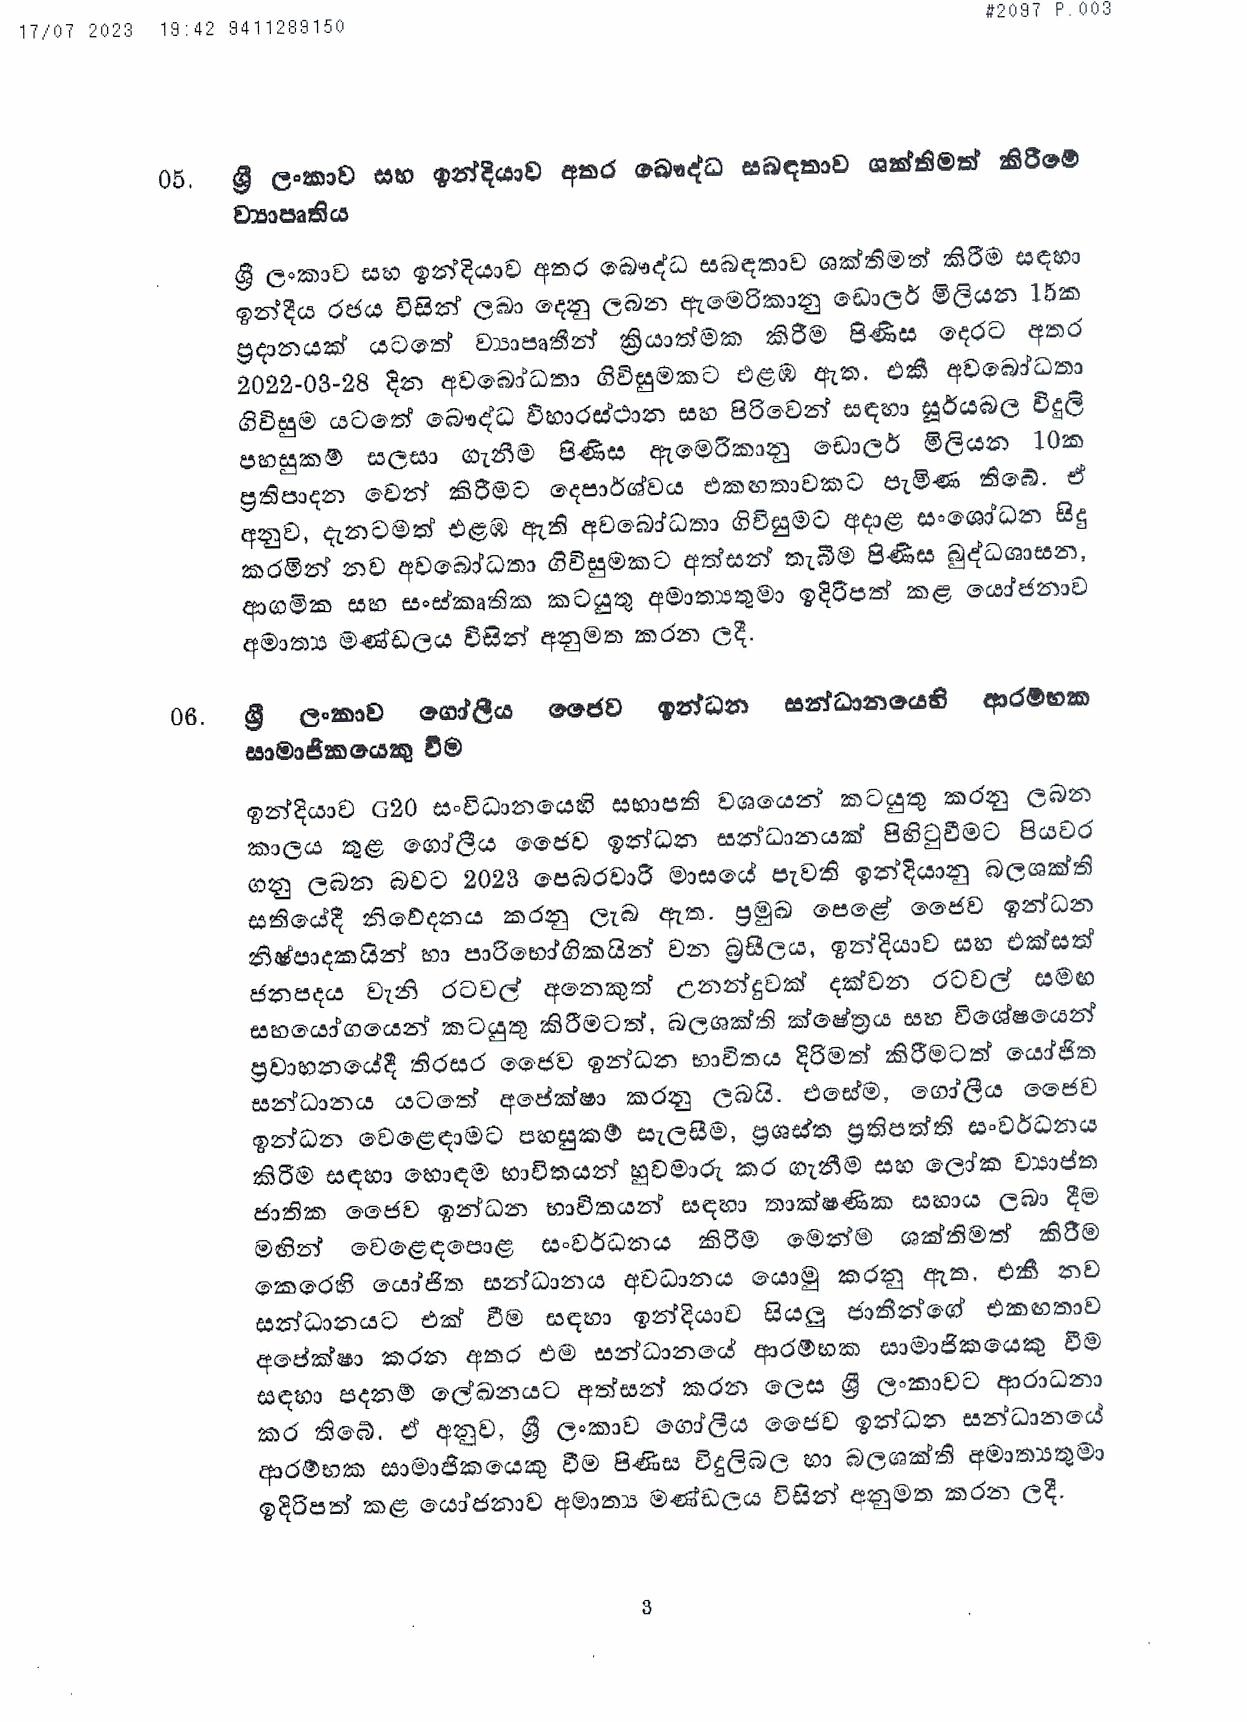 Cabinet Decision on 17.07.2023 page 003